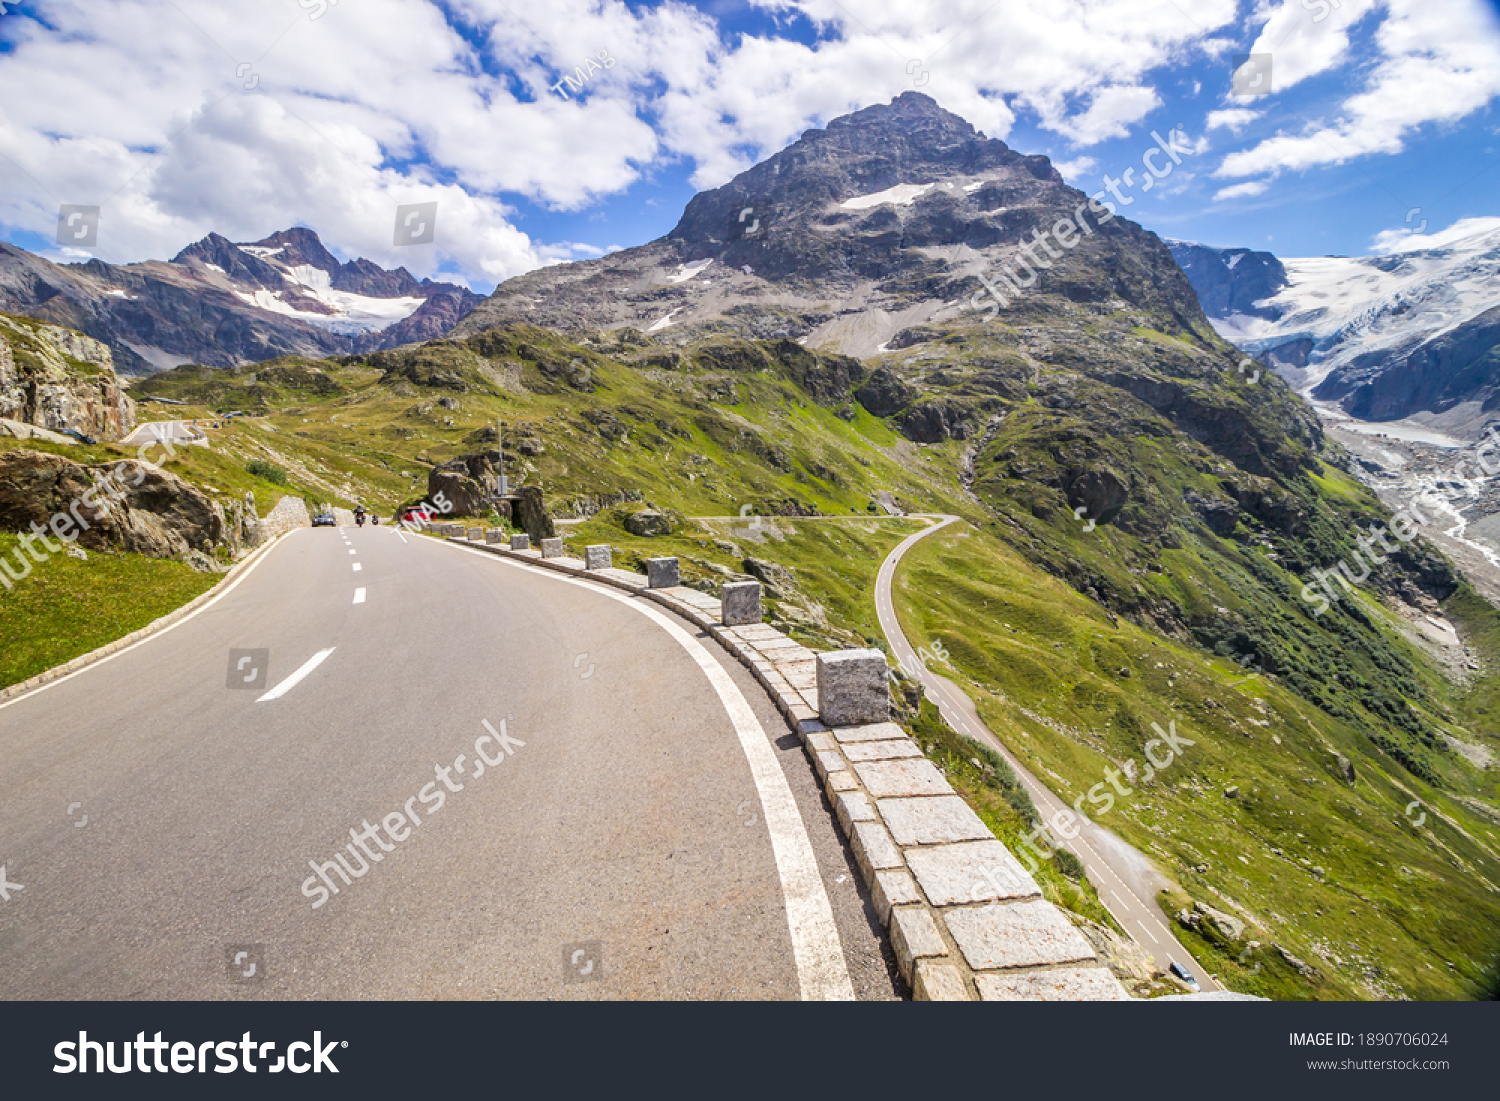 High mountain road through the Susten Pass in the Swiss Alps #1890706024